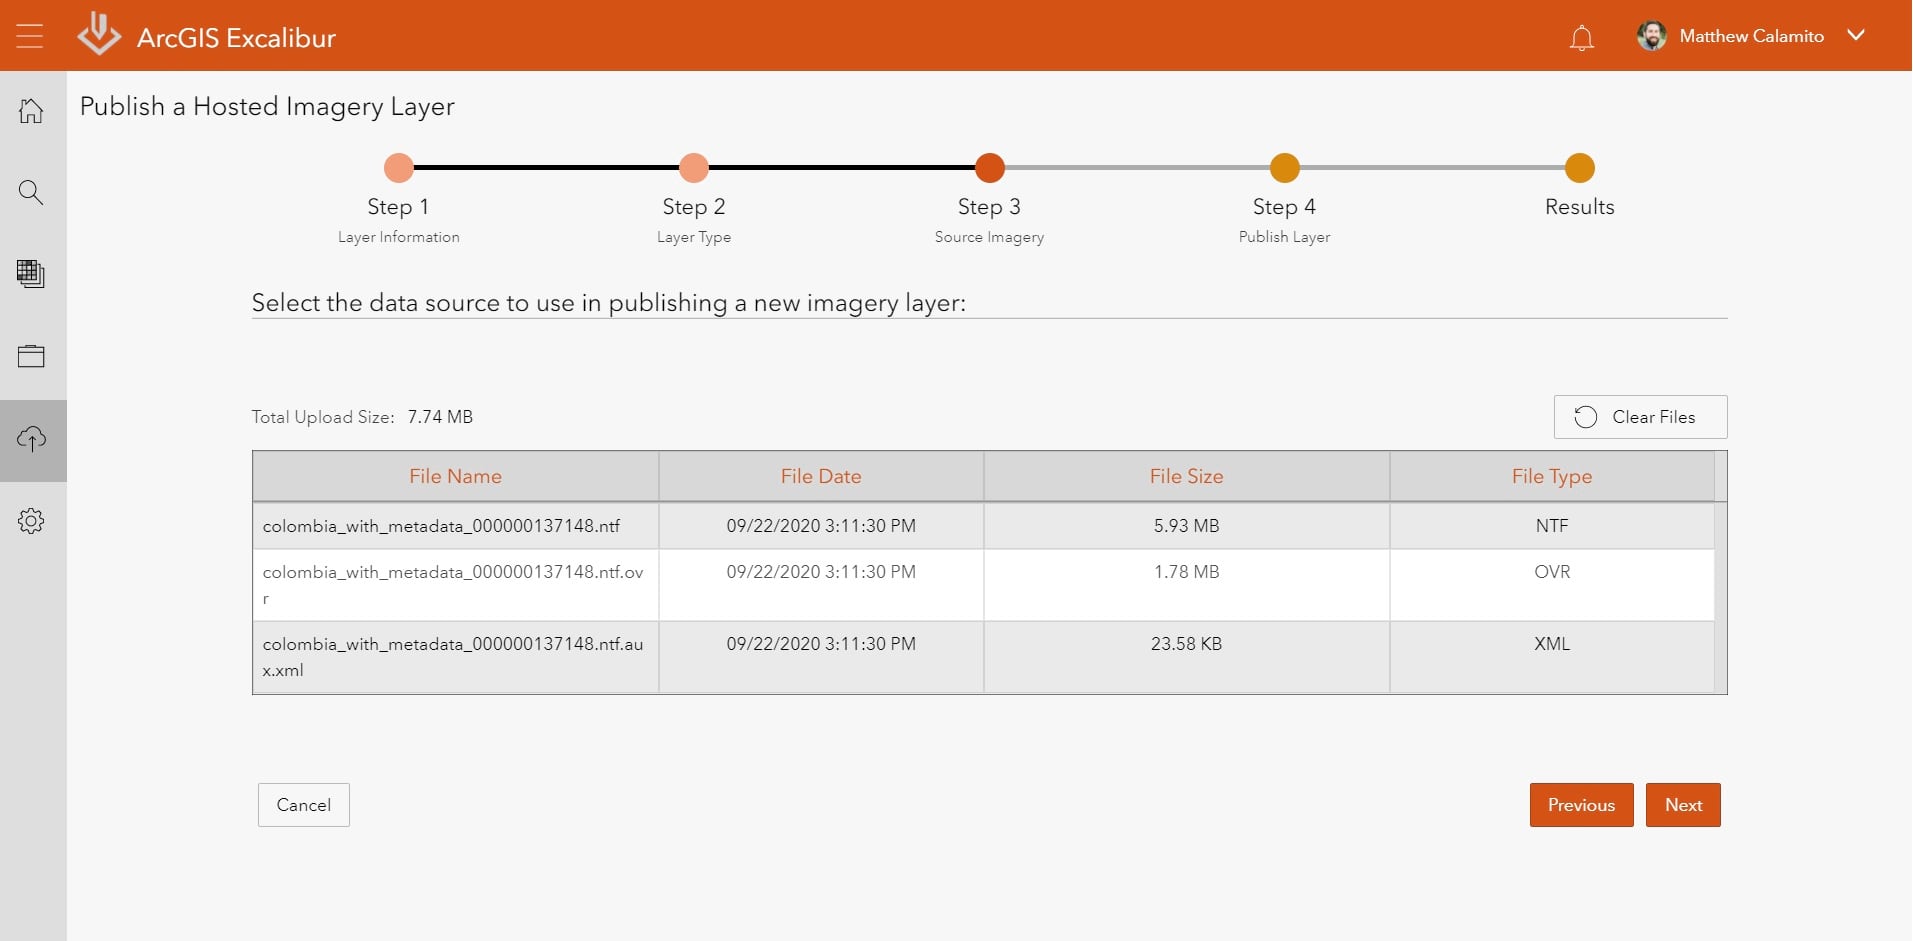 ArcGIS Excalibur Publish Imagery Step 3 - Select Imagery